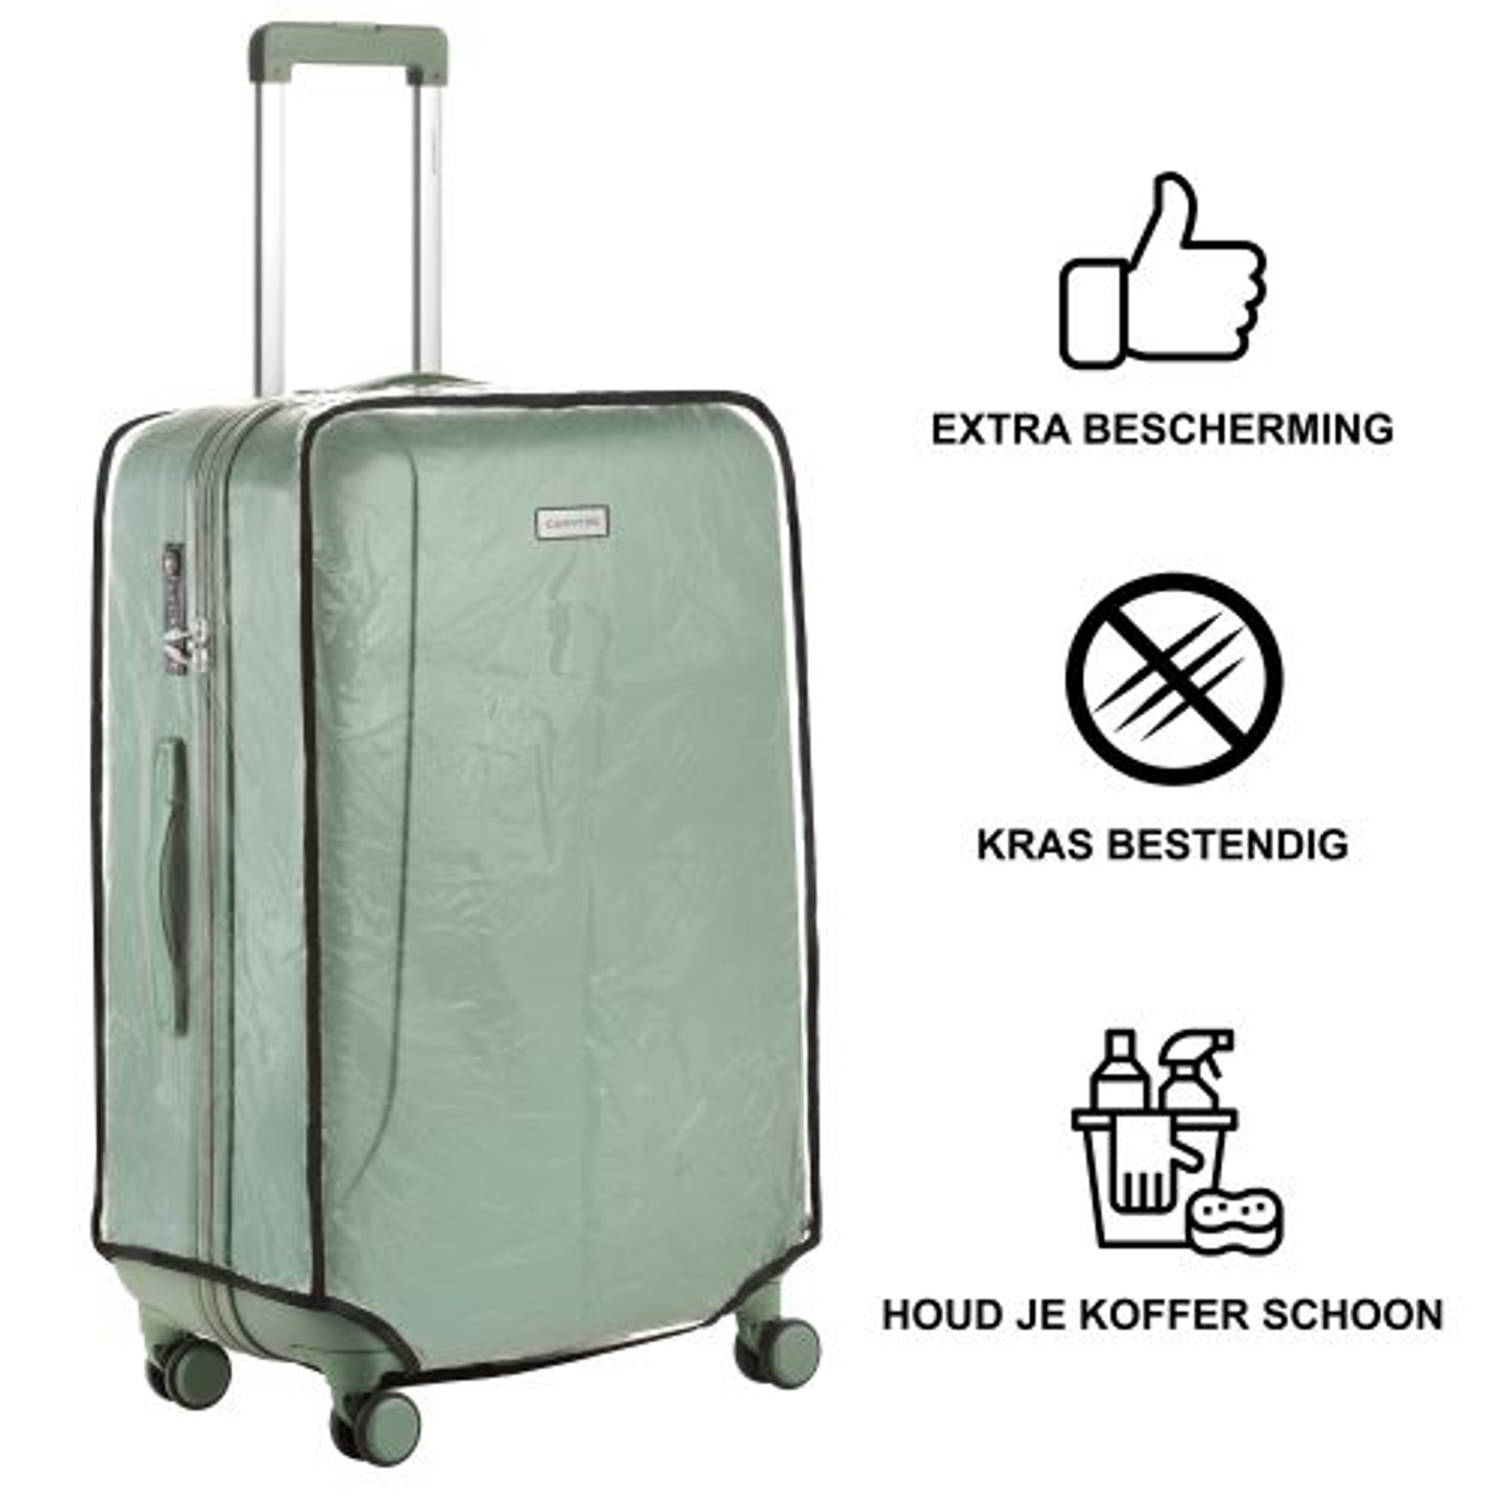 sneeuw Vleugels Vergissing CarryOn Kofferhoes - Beschermhoes koffer - Luggage Cover Large -  Transparant | Blokker